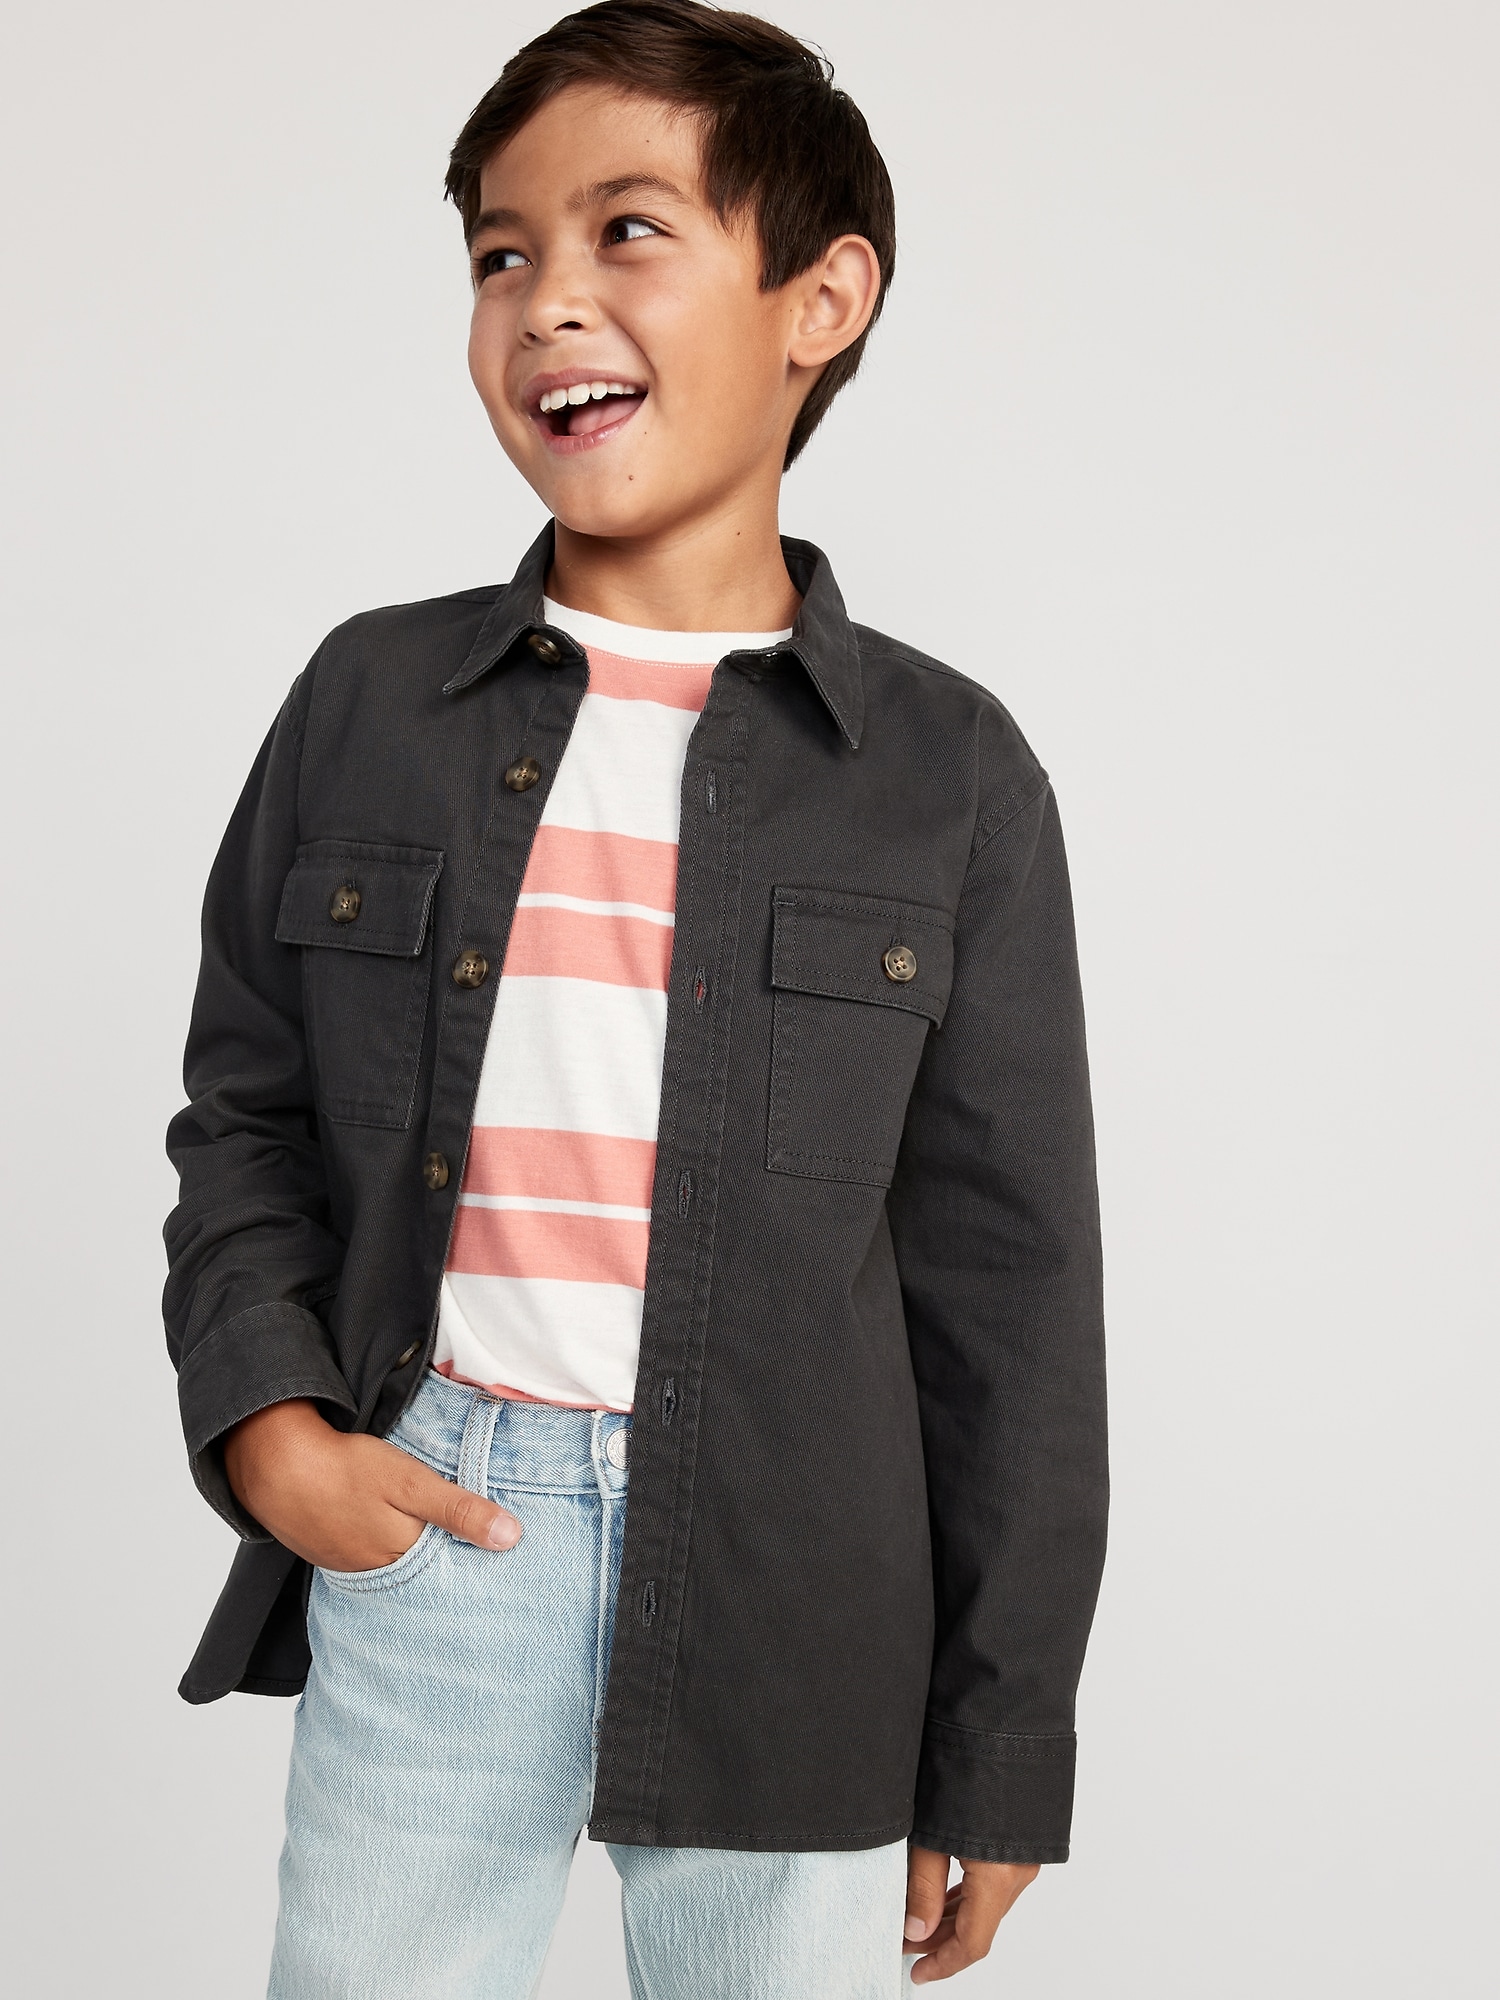 Long-Sleeve Utility Pocket Twill Shirt for Boys | Old Navy